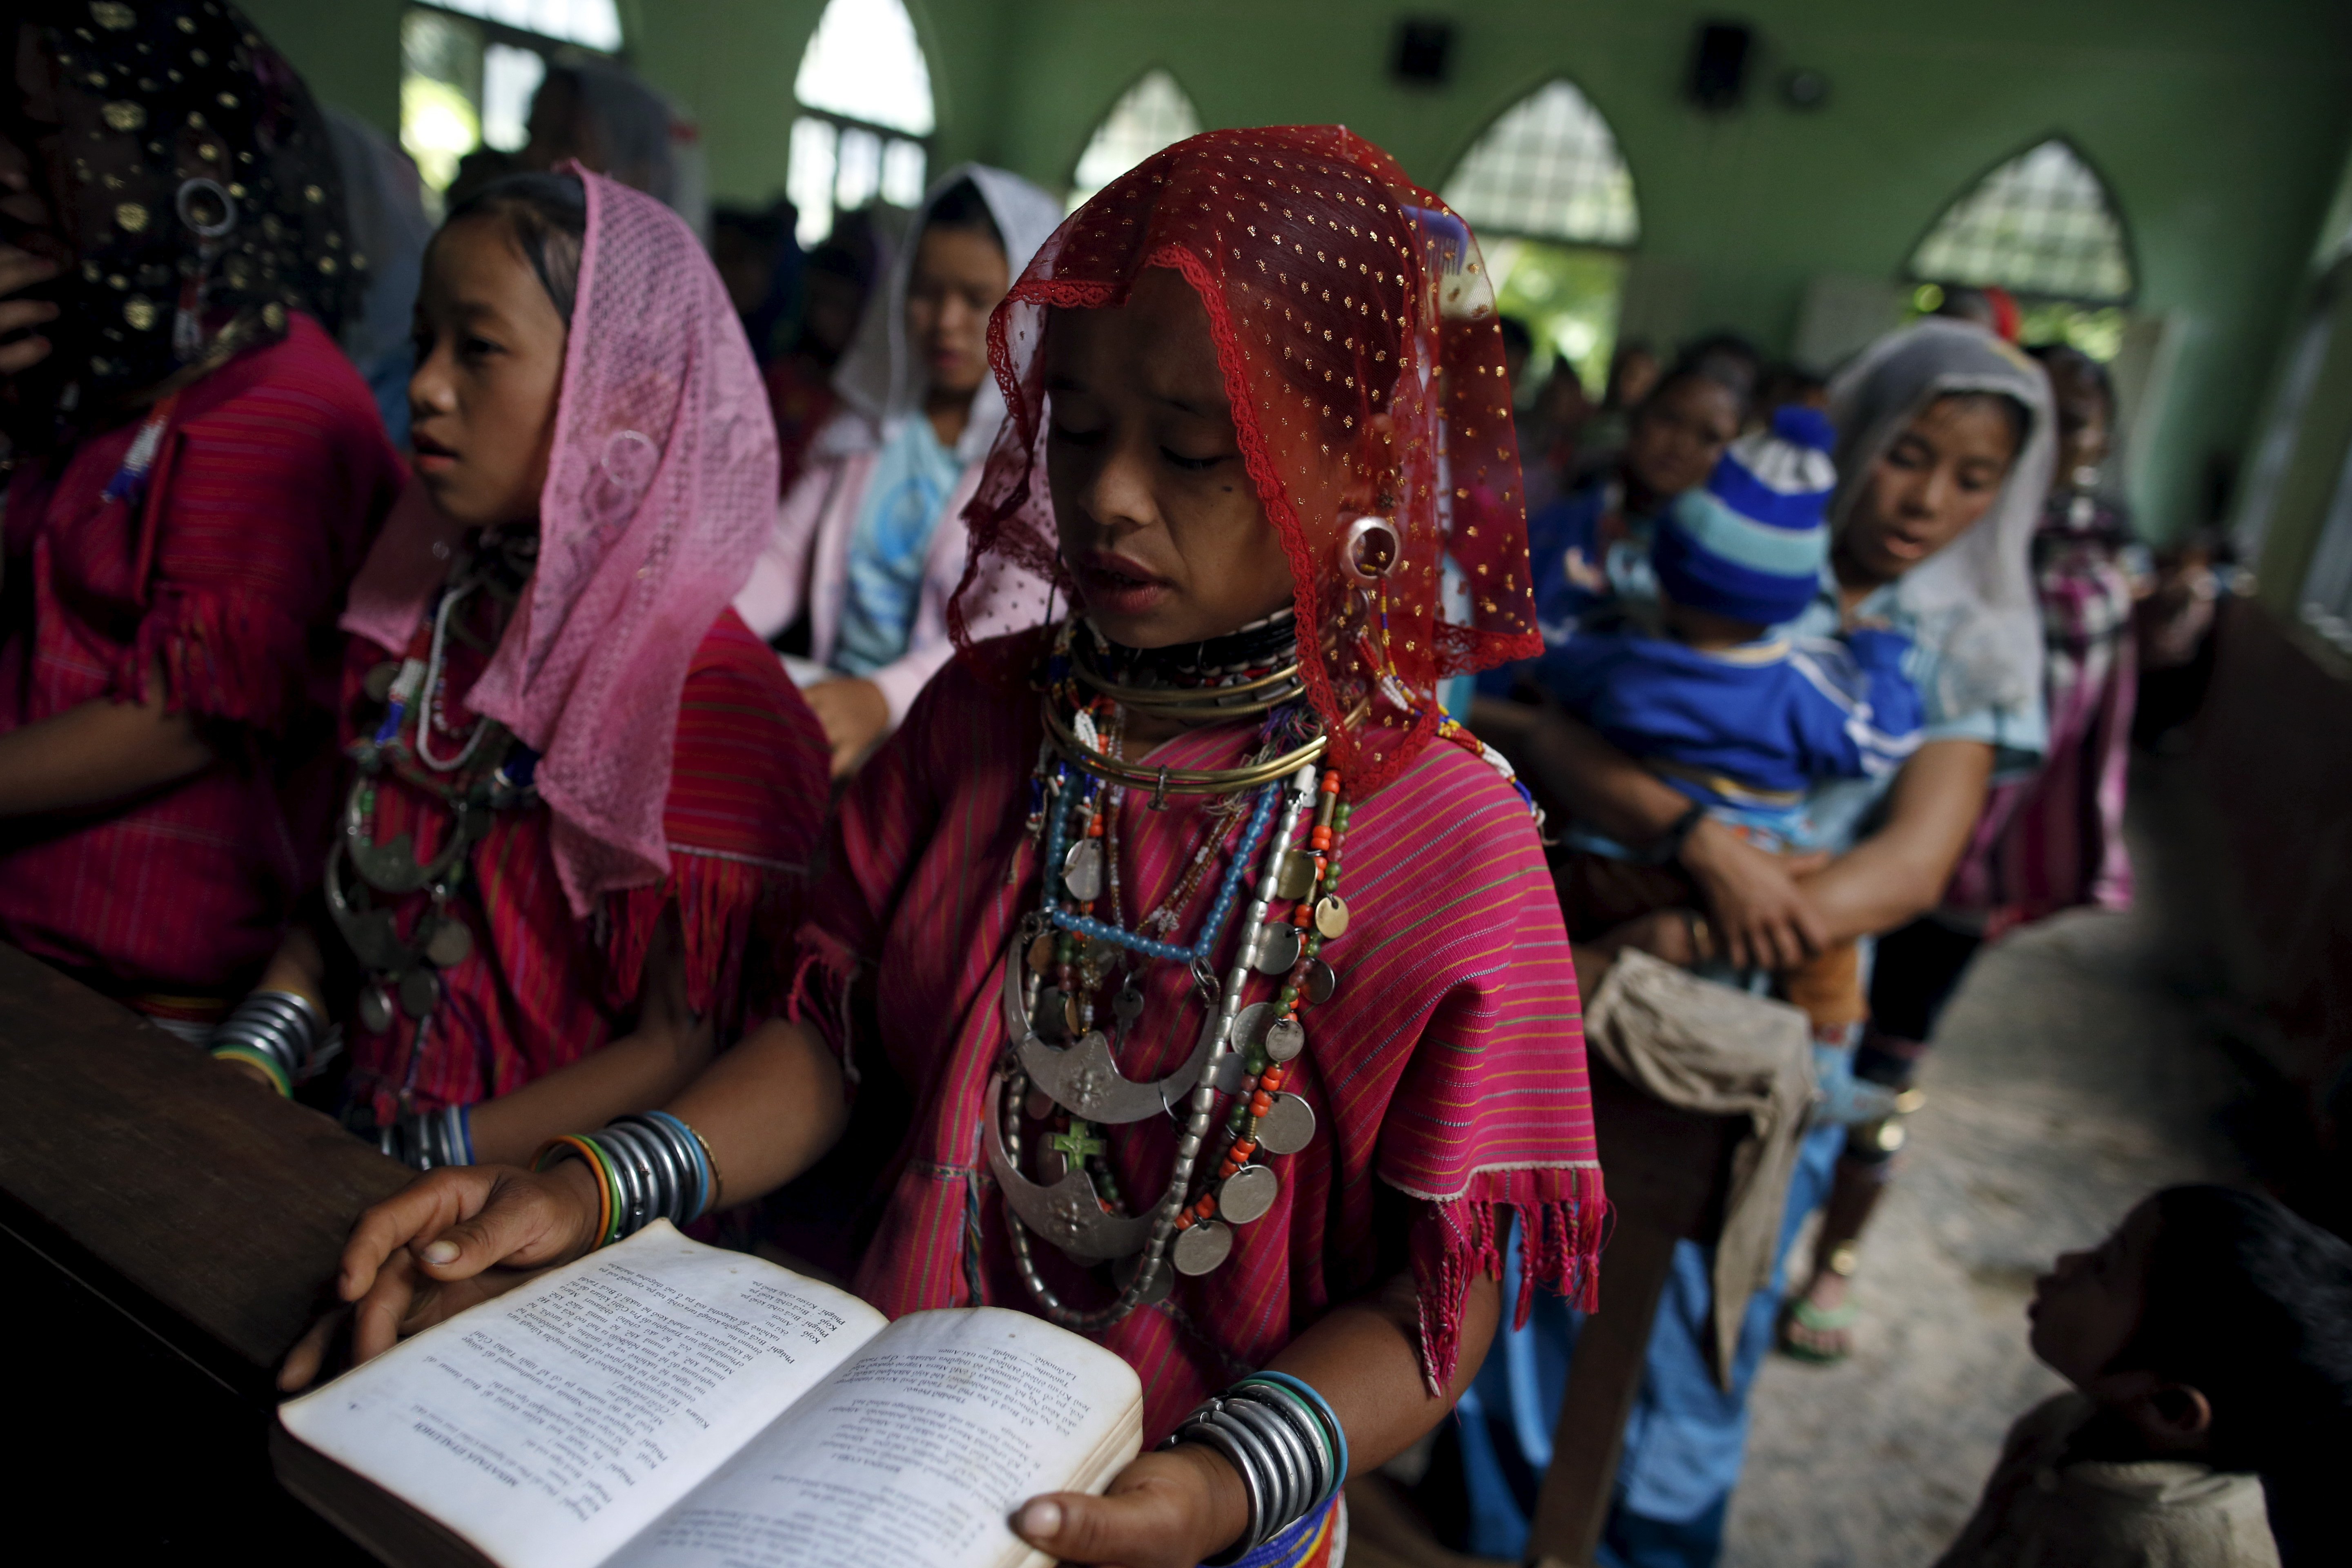 People in the Kayah state of Myanmar attend Catholic Mass in the Htaykho village in this 2015 file photo. (CNS photo/Soe Zeya Tun, Reuters)